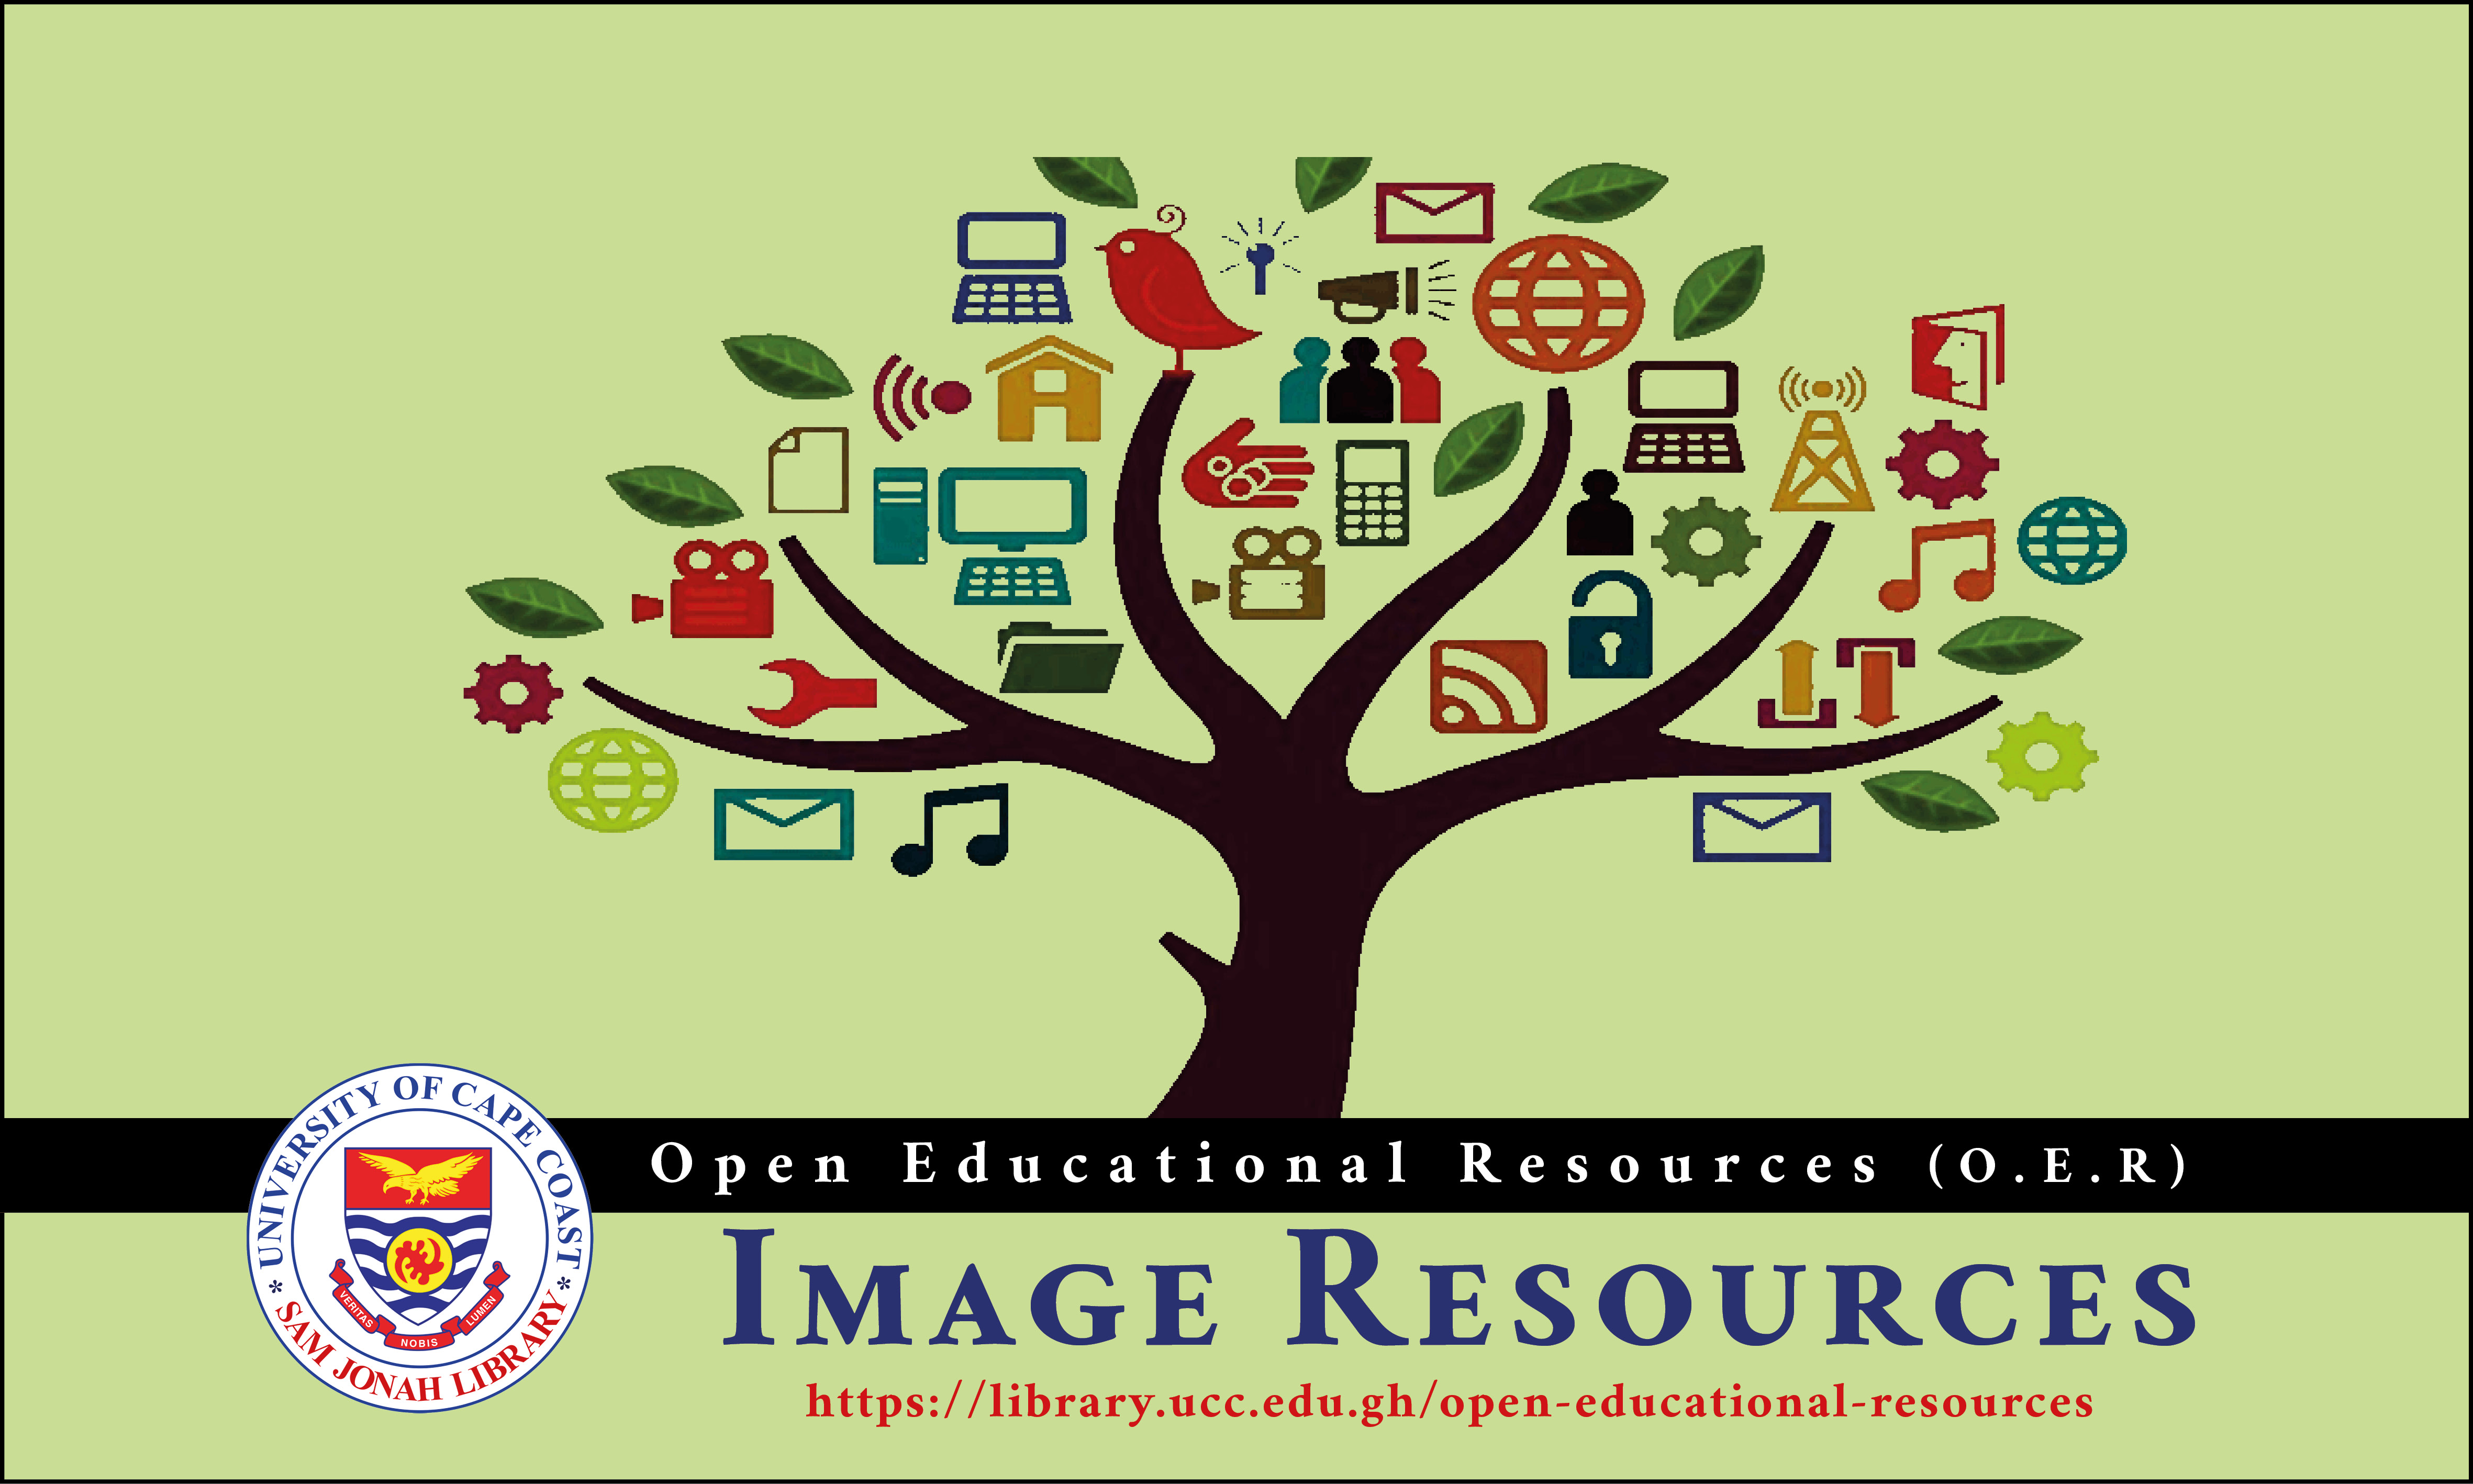 OPEN IMAGE RESOURCES